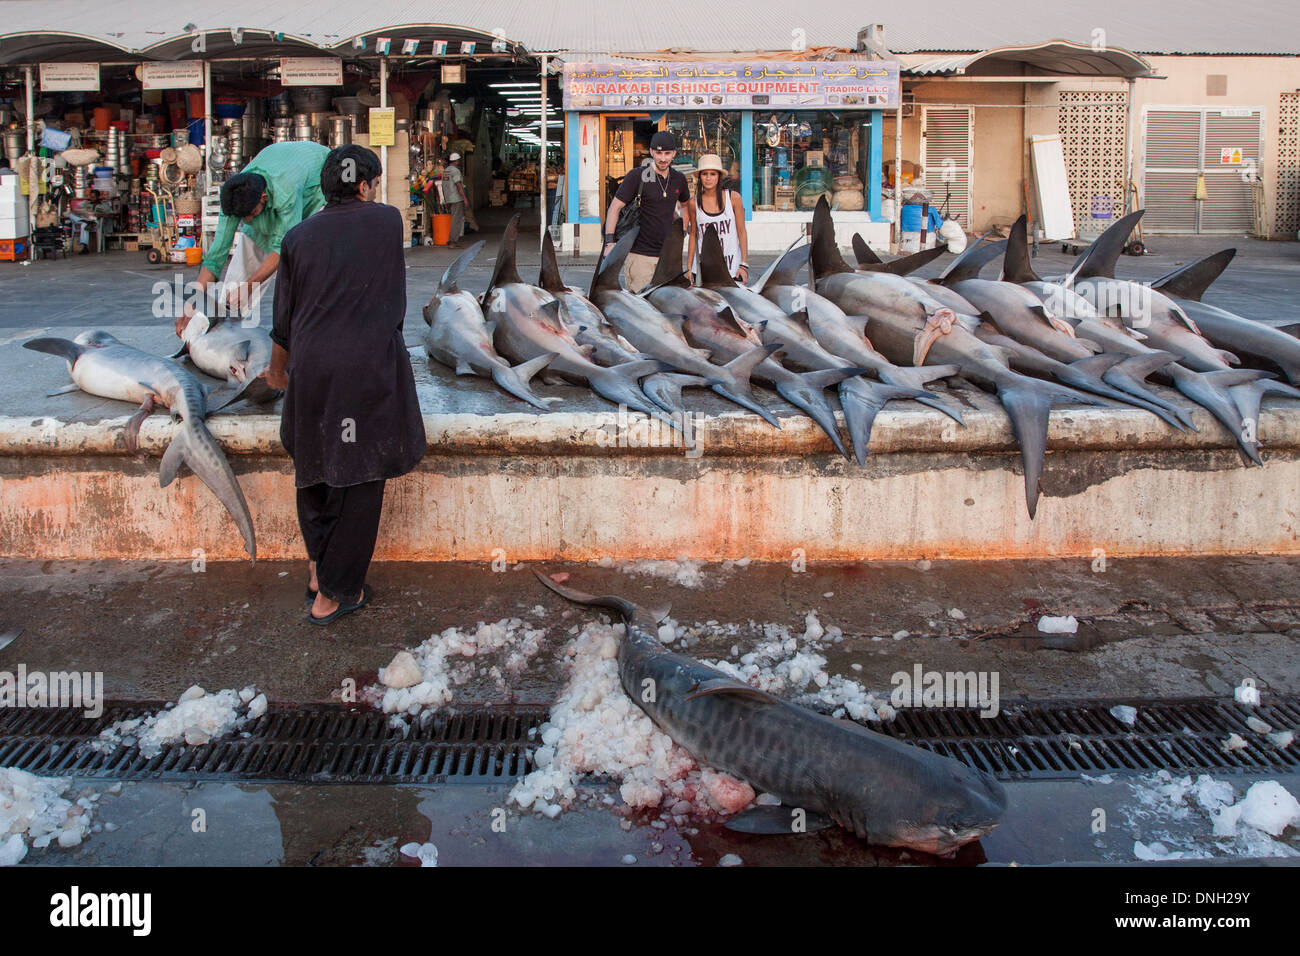 STALL SELLING SHARKS IN FRONT OF THE FISH MARKET IN THE DEIRA QUARTER, DUBAI, UNITED ARAB EMIRATES, MIDDLE EAST Stock Photo